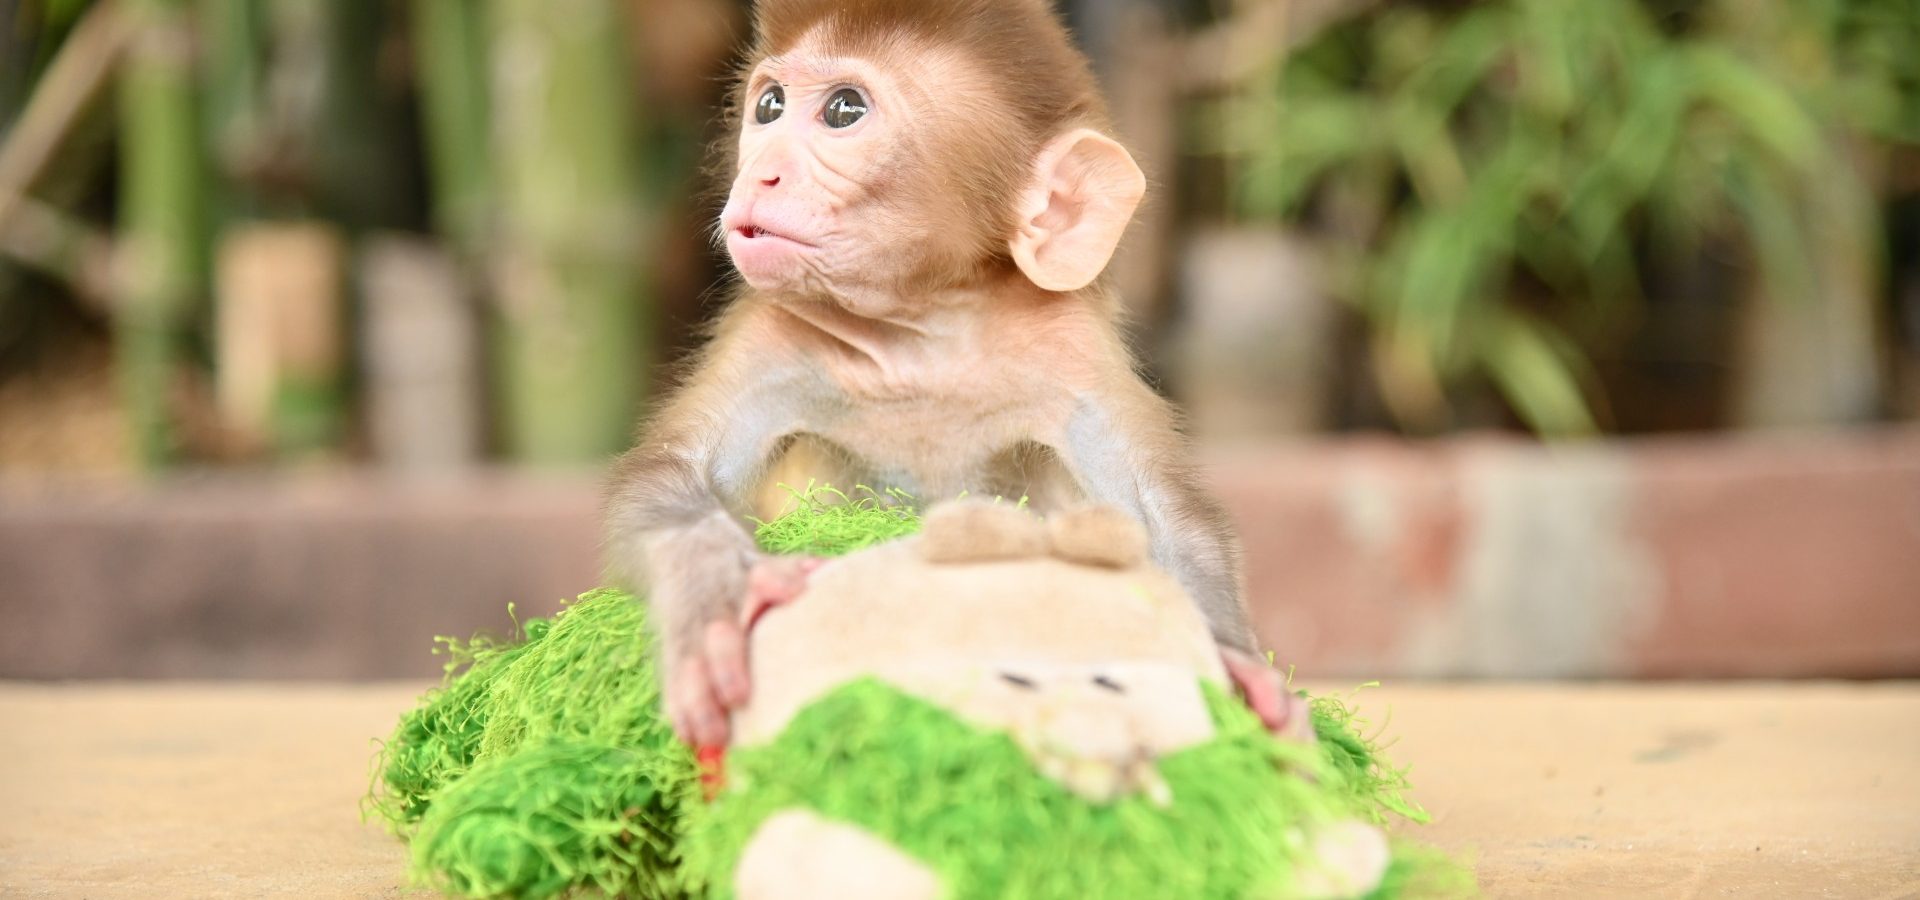 Care and Compassion For Orphaned Monkeys - Wildlife SOS